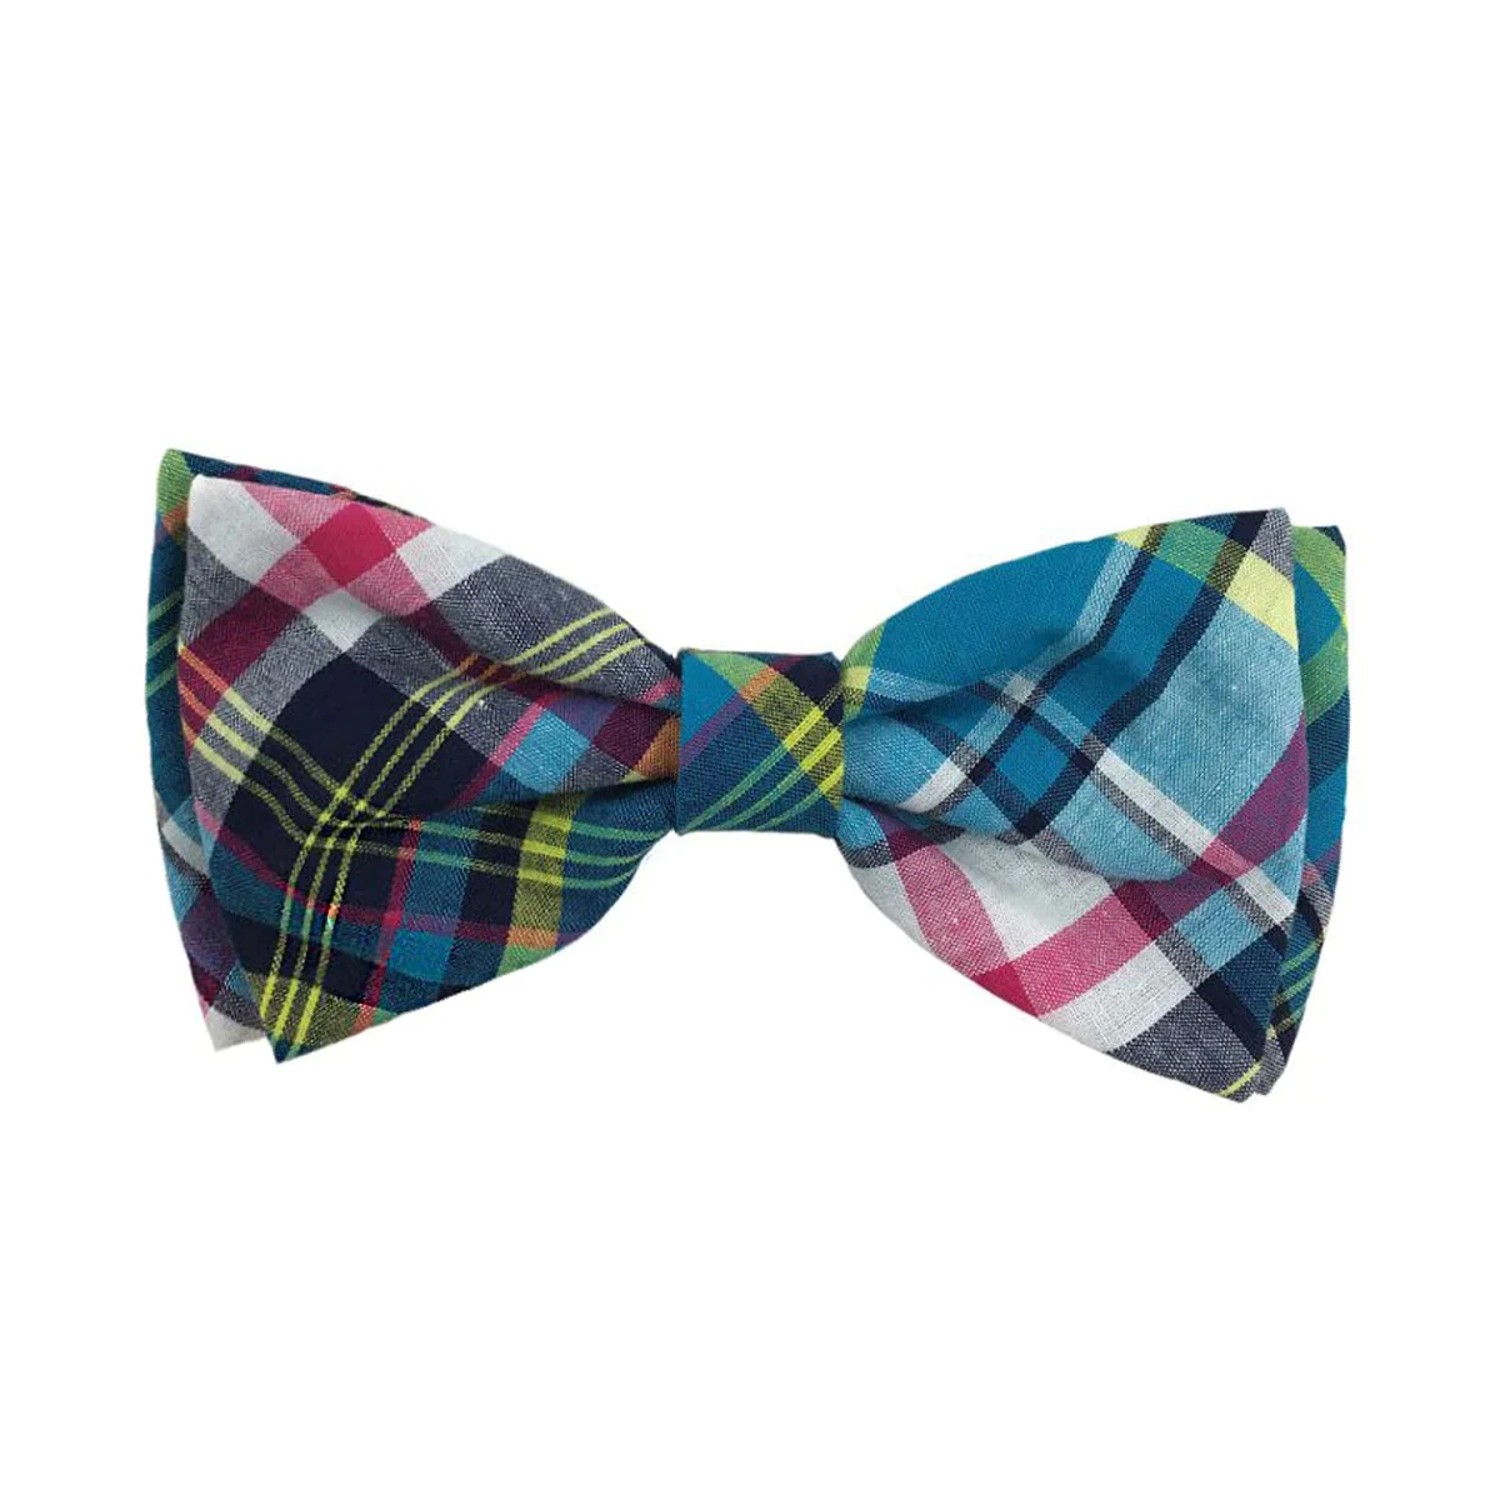 Huxley & Kent Dog and Cat Bow Tie Collar Attachment - Blue Madras